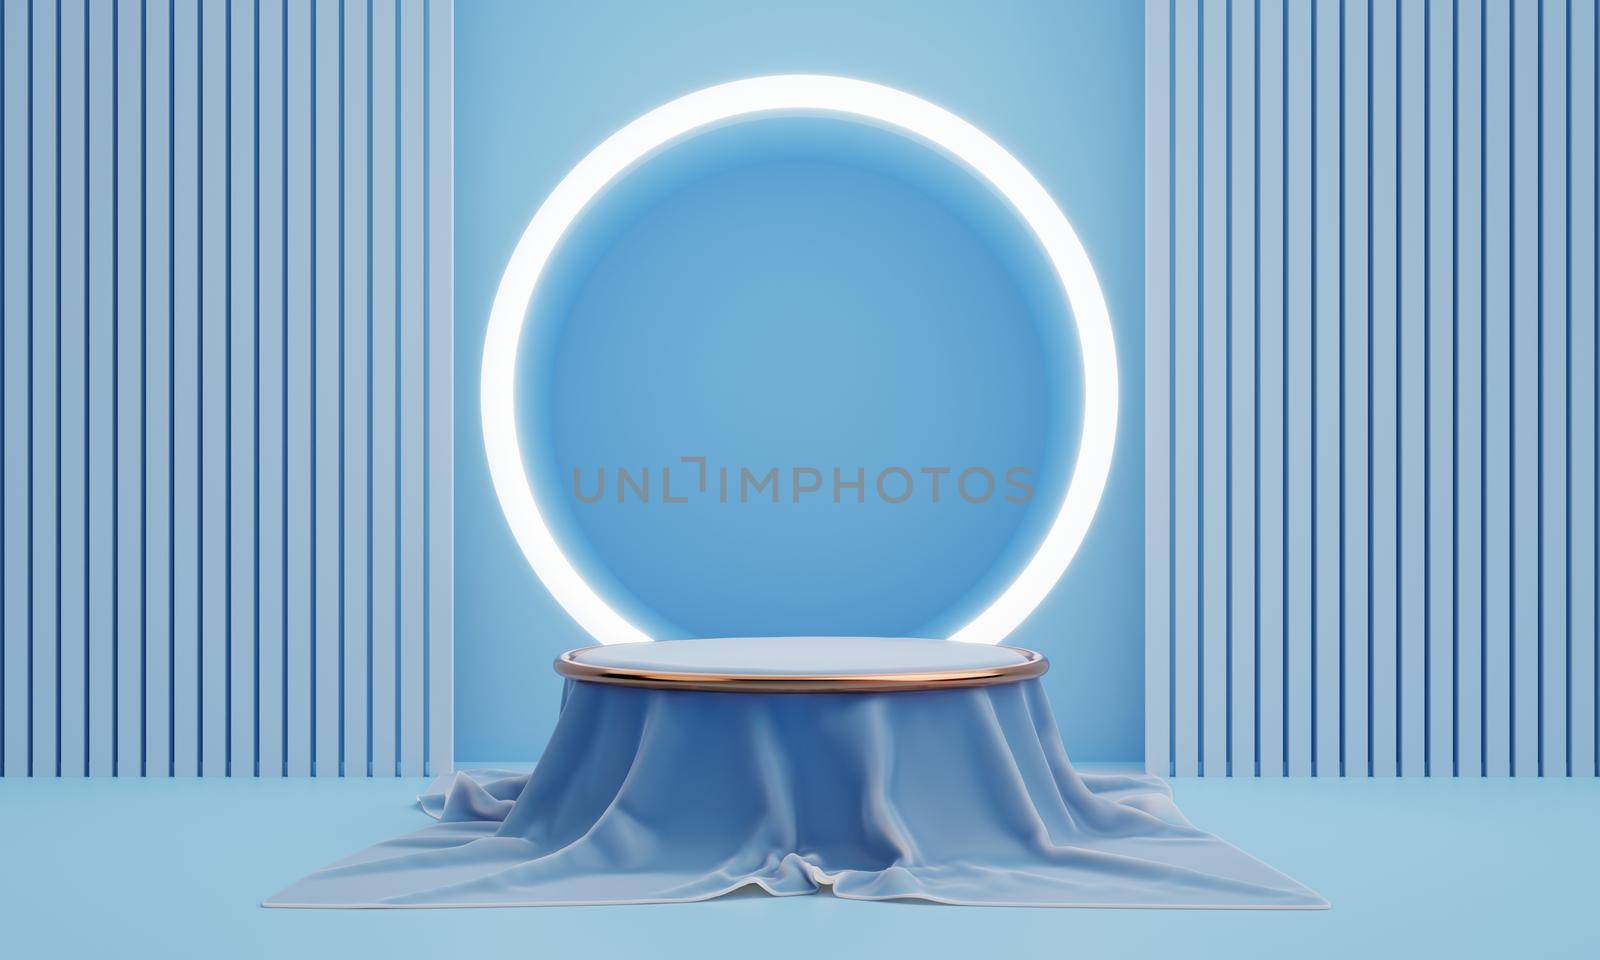 Minimal product podium stage in pastel blue color and geometric shape for presentation background. Abstract background and decoration scene element template concept. 3D illustration rendering